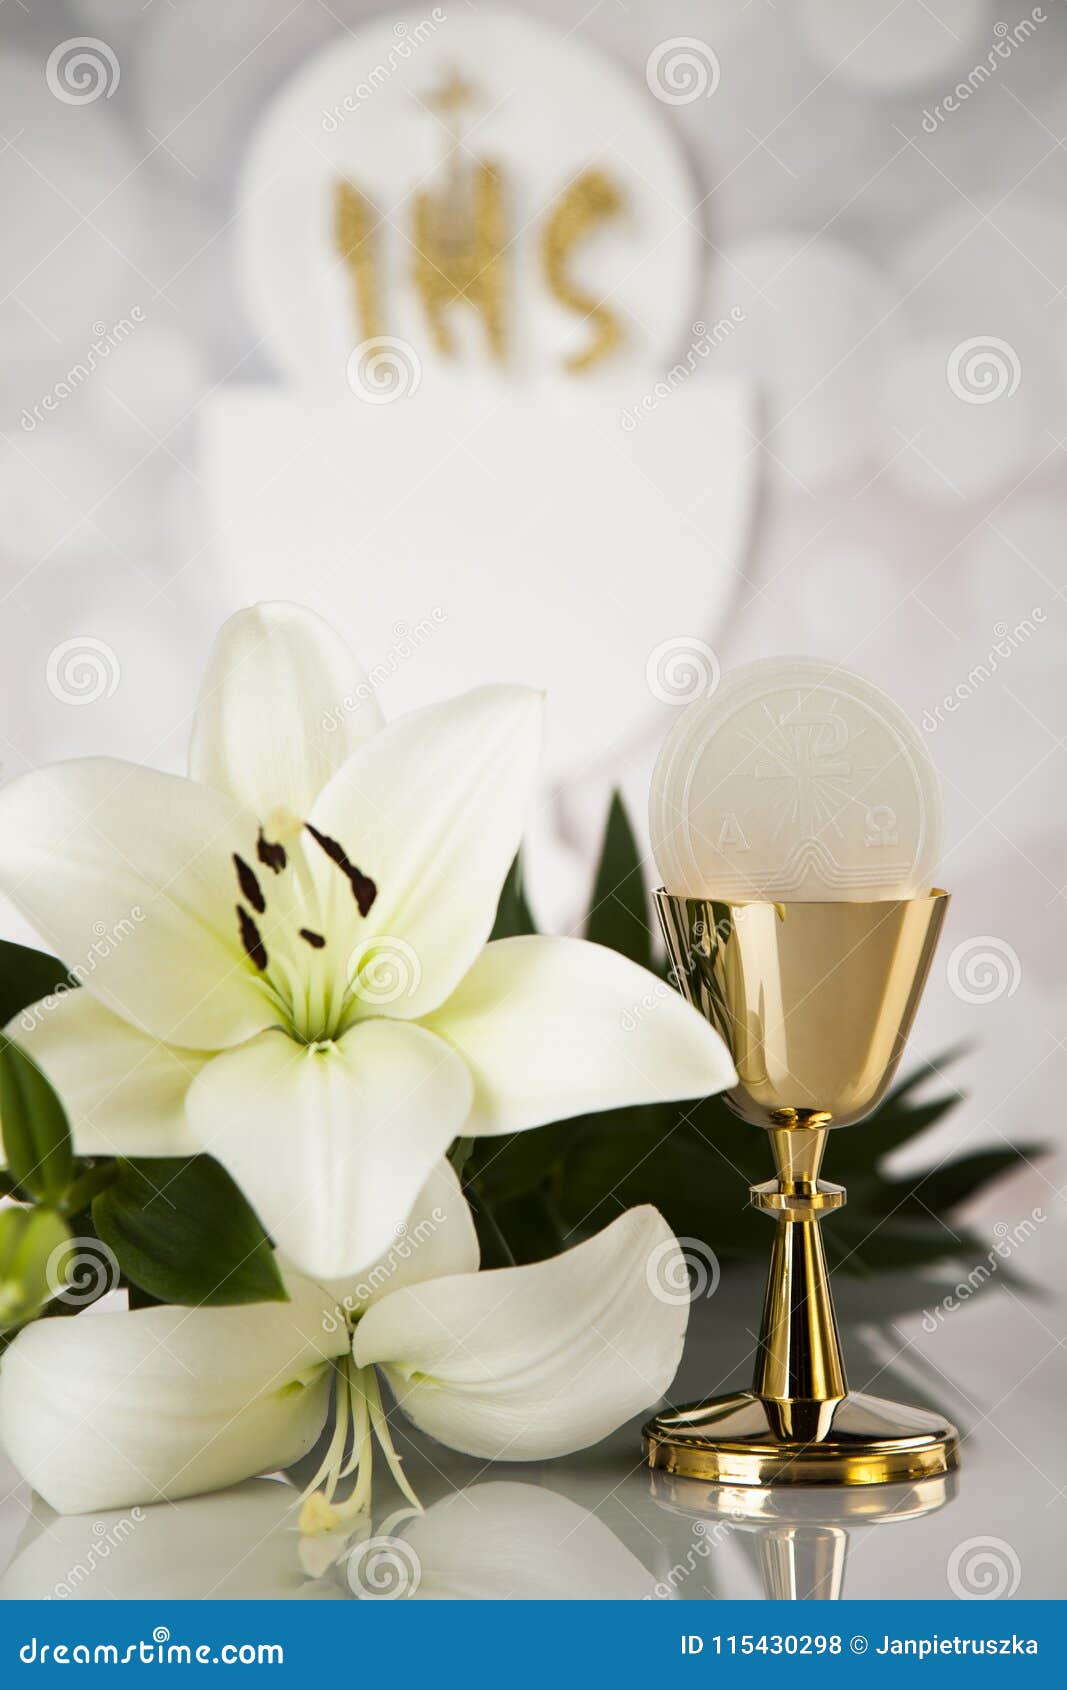 Holy Communion a Golden Chalice with Grapes and Bread Wafers Stock ...